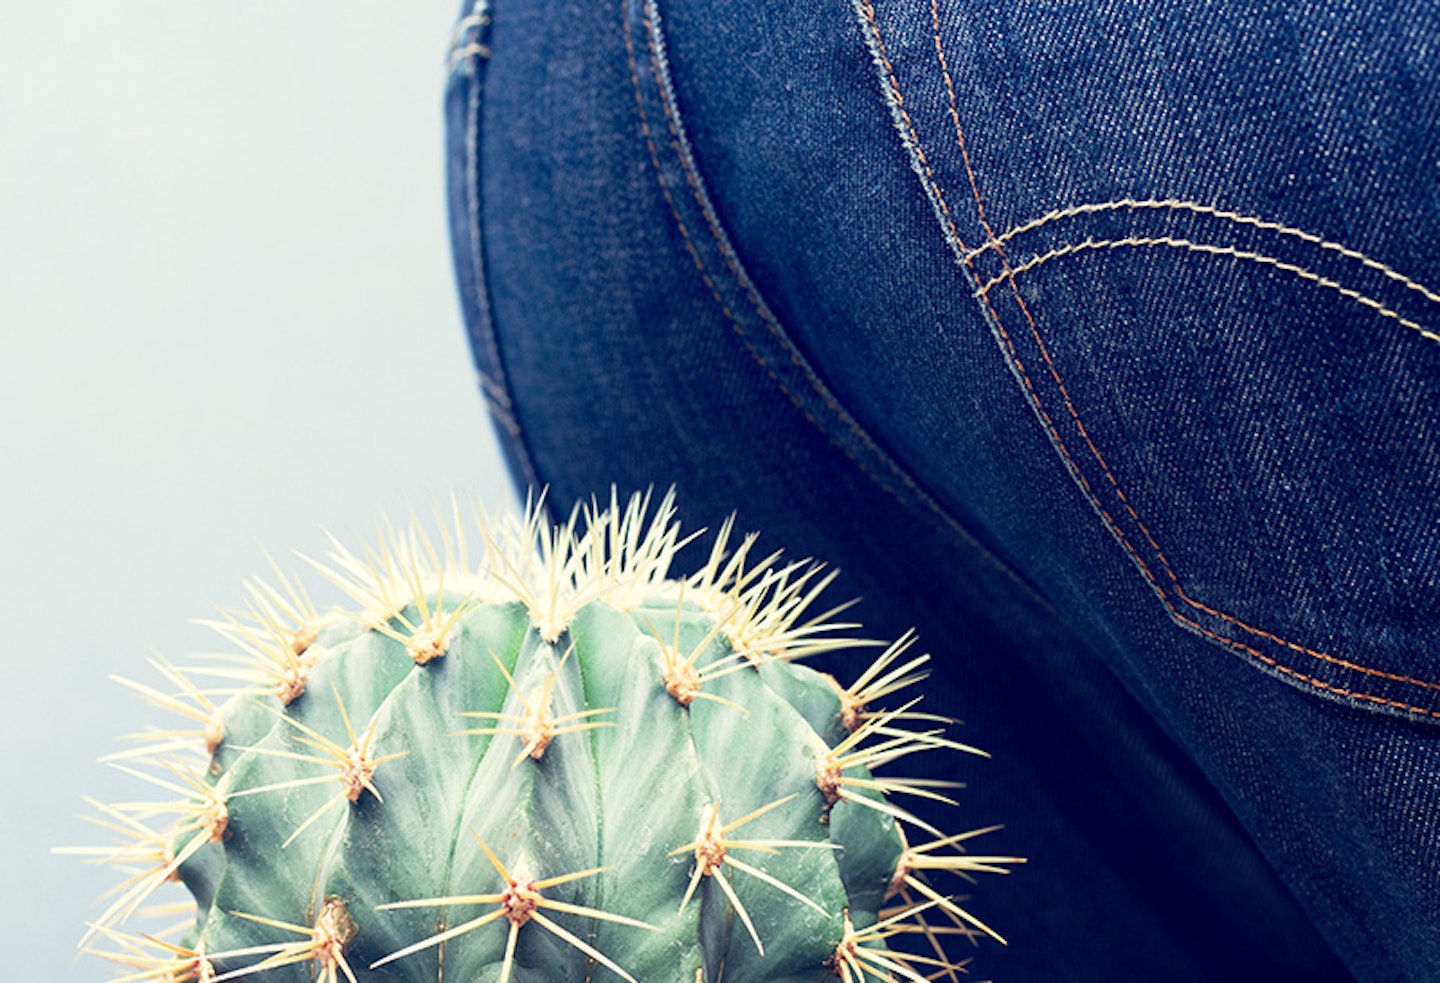 Haemorrhoids represented by a bum and a cactus